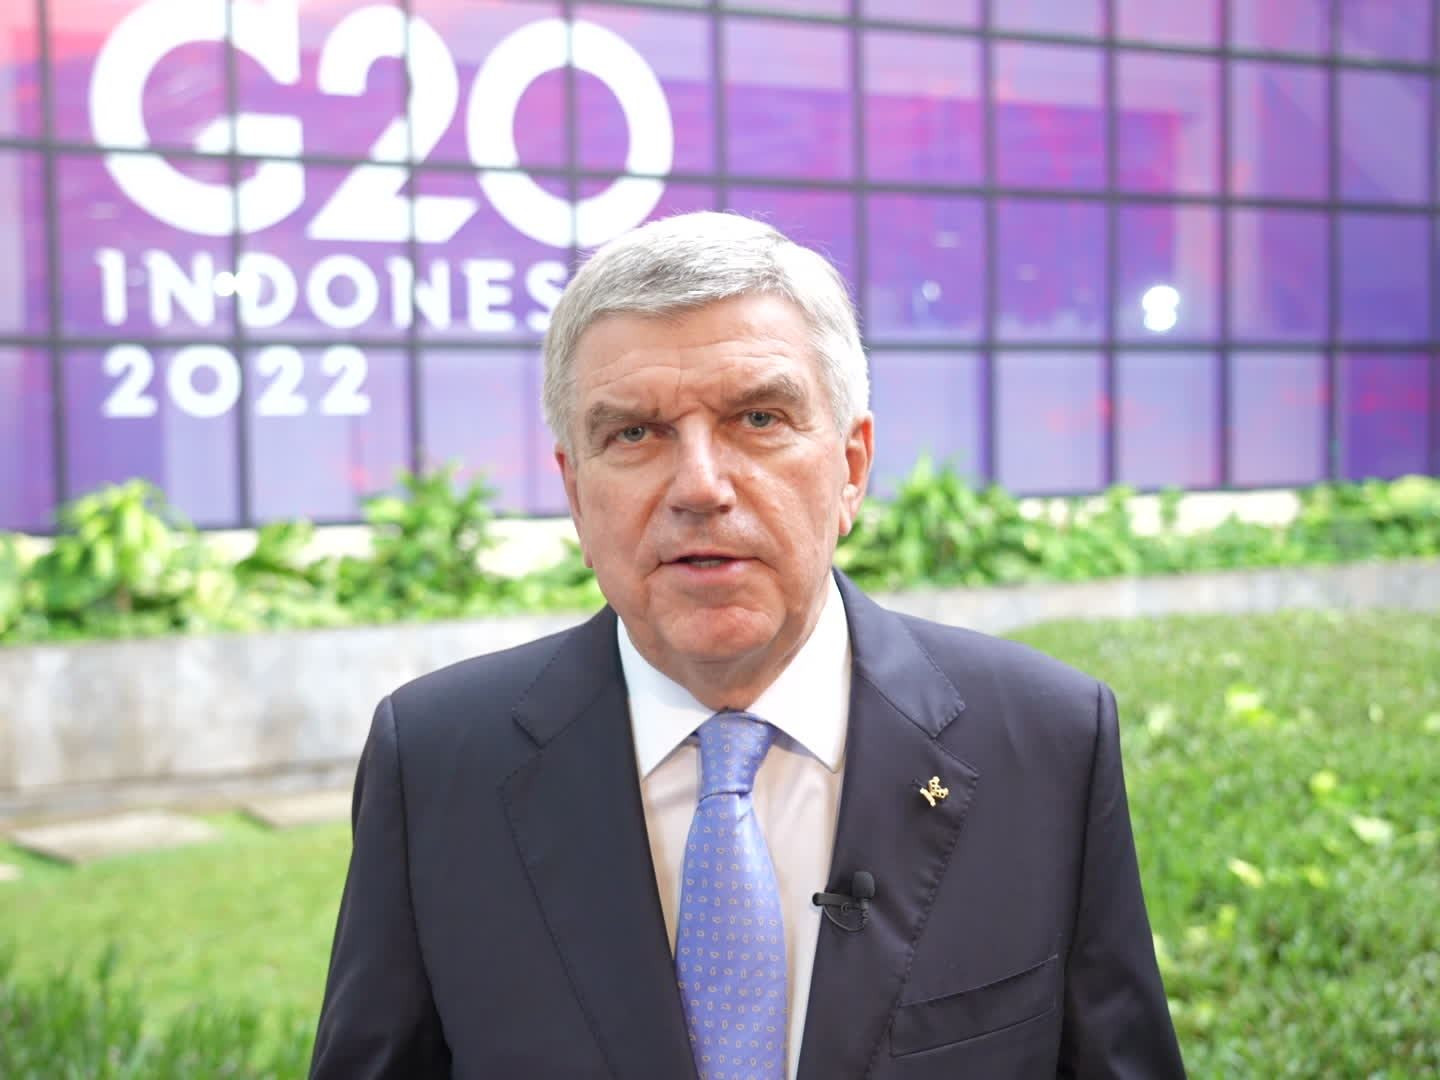 Thomas Bach's controversial speech to the G20 Summit in Bali about not using sport for political reasons has been condemned by both Russia and Ukraine ©YouTube